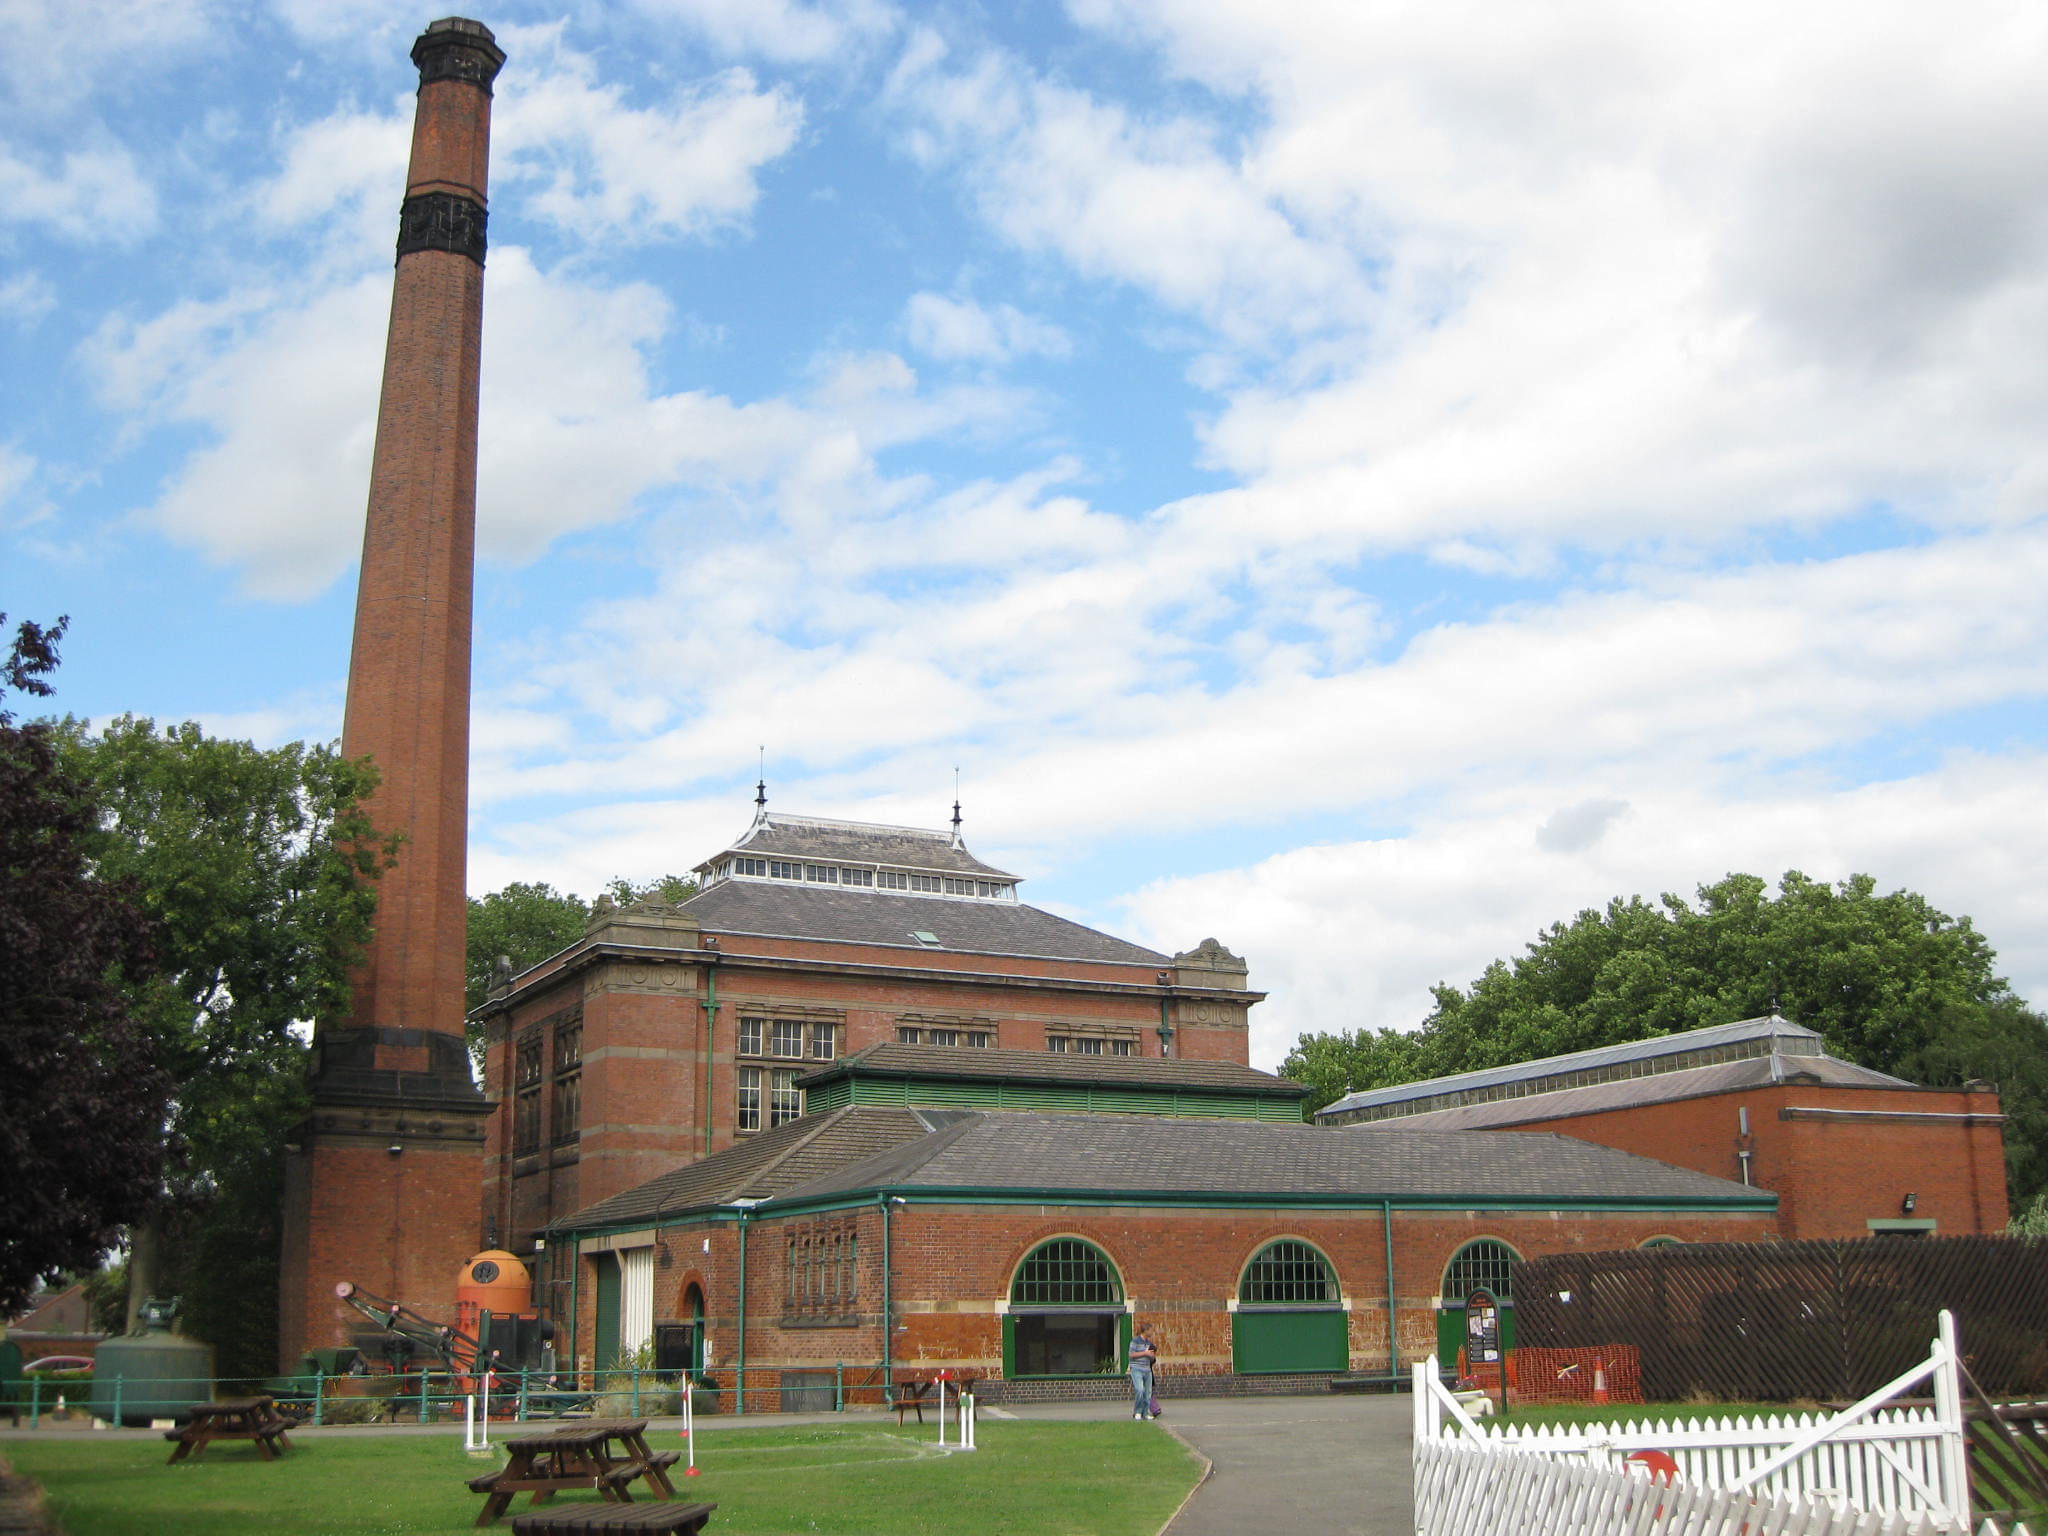 Abbey Pumping Station Museum Overview